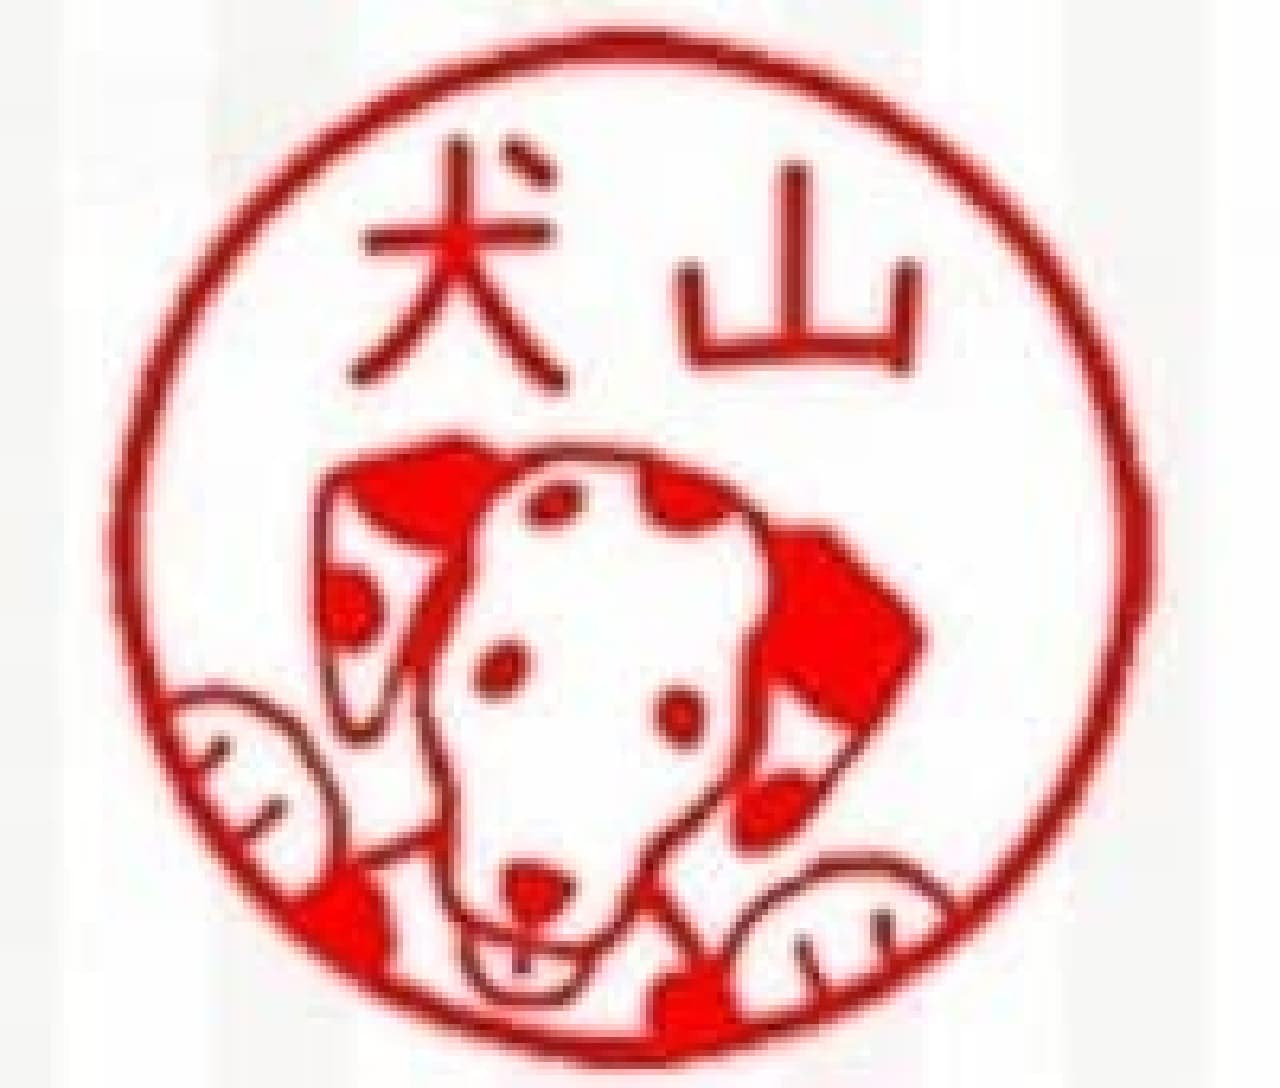 Added 15 breeds to the dog's illustrated seal "Inuzukan"